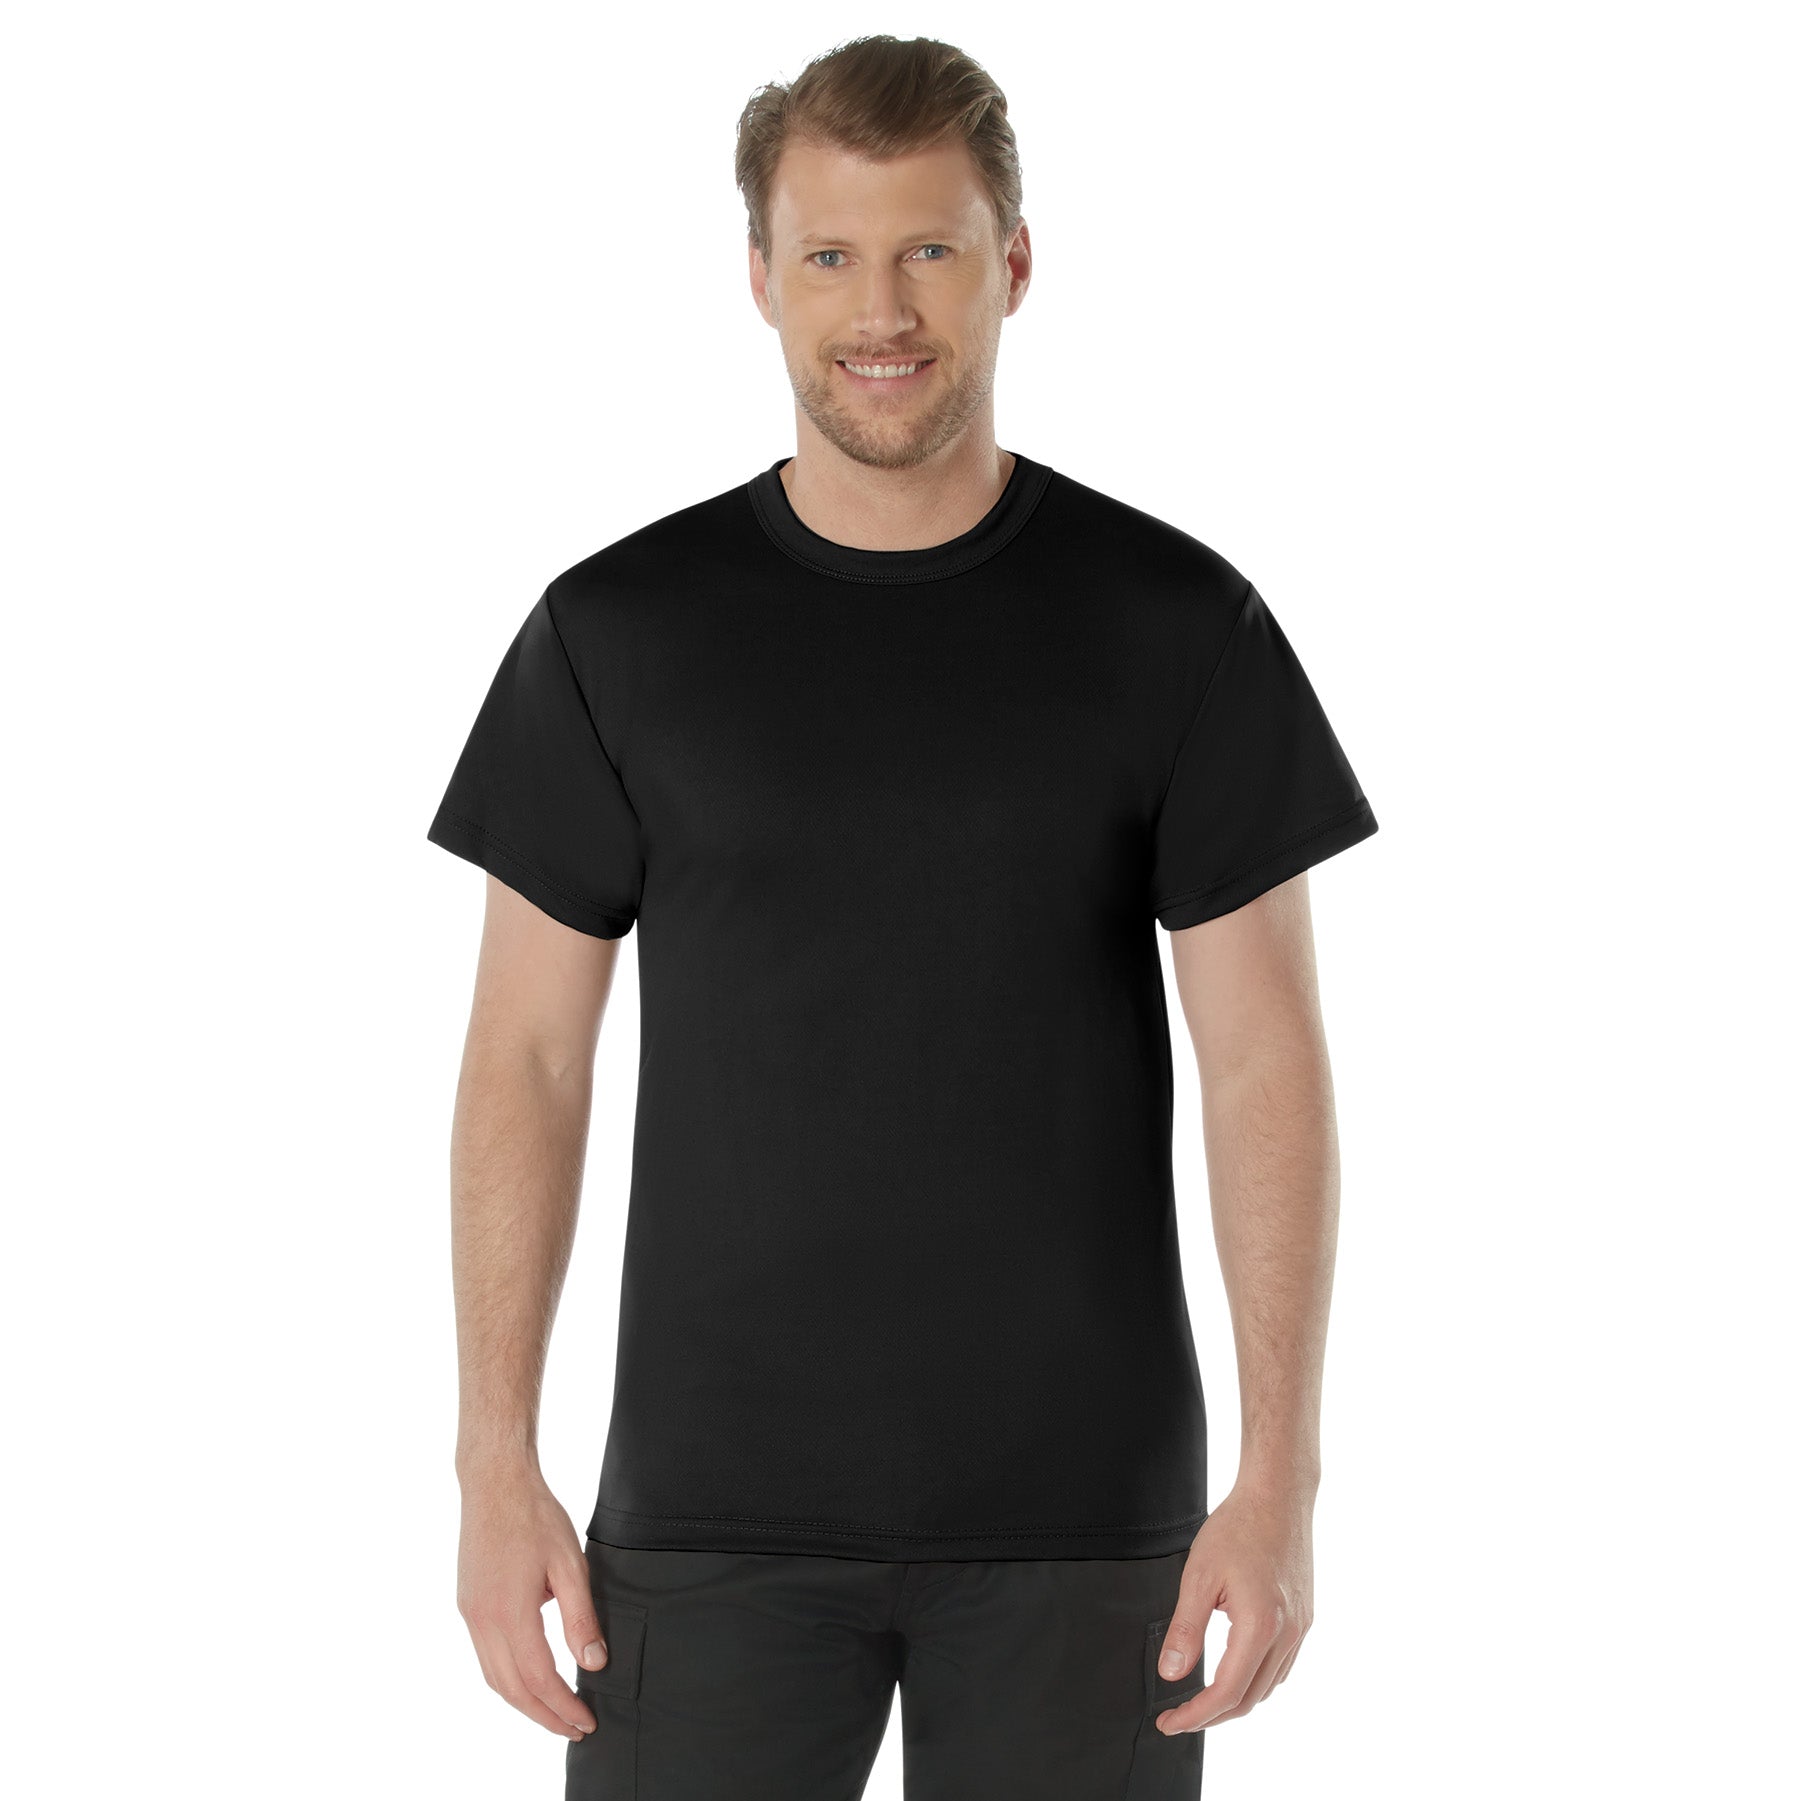 [AR 670-1] Poly Quick Dry Moisture Wicking T-Shirts Black